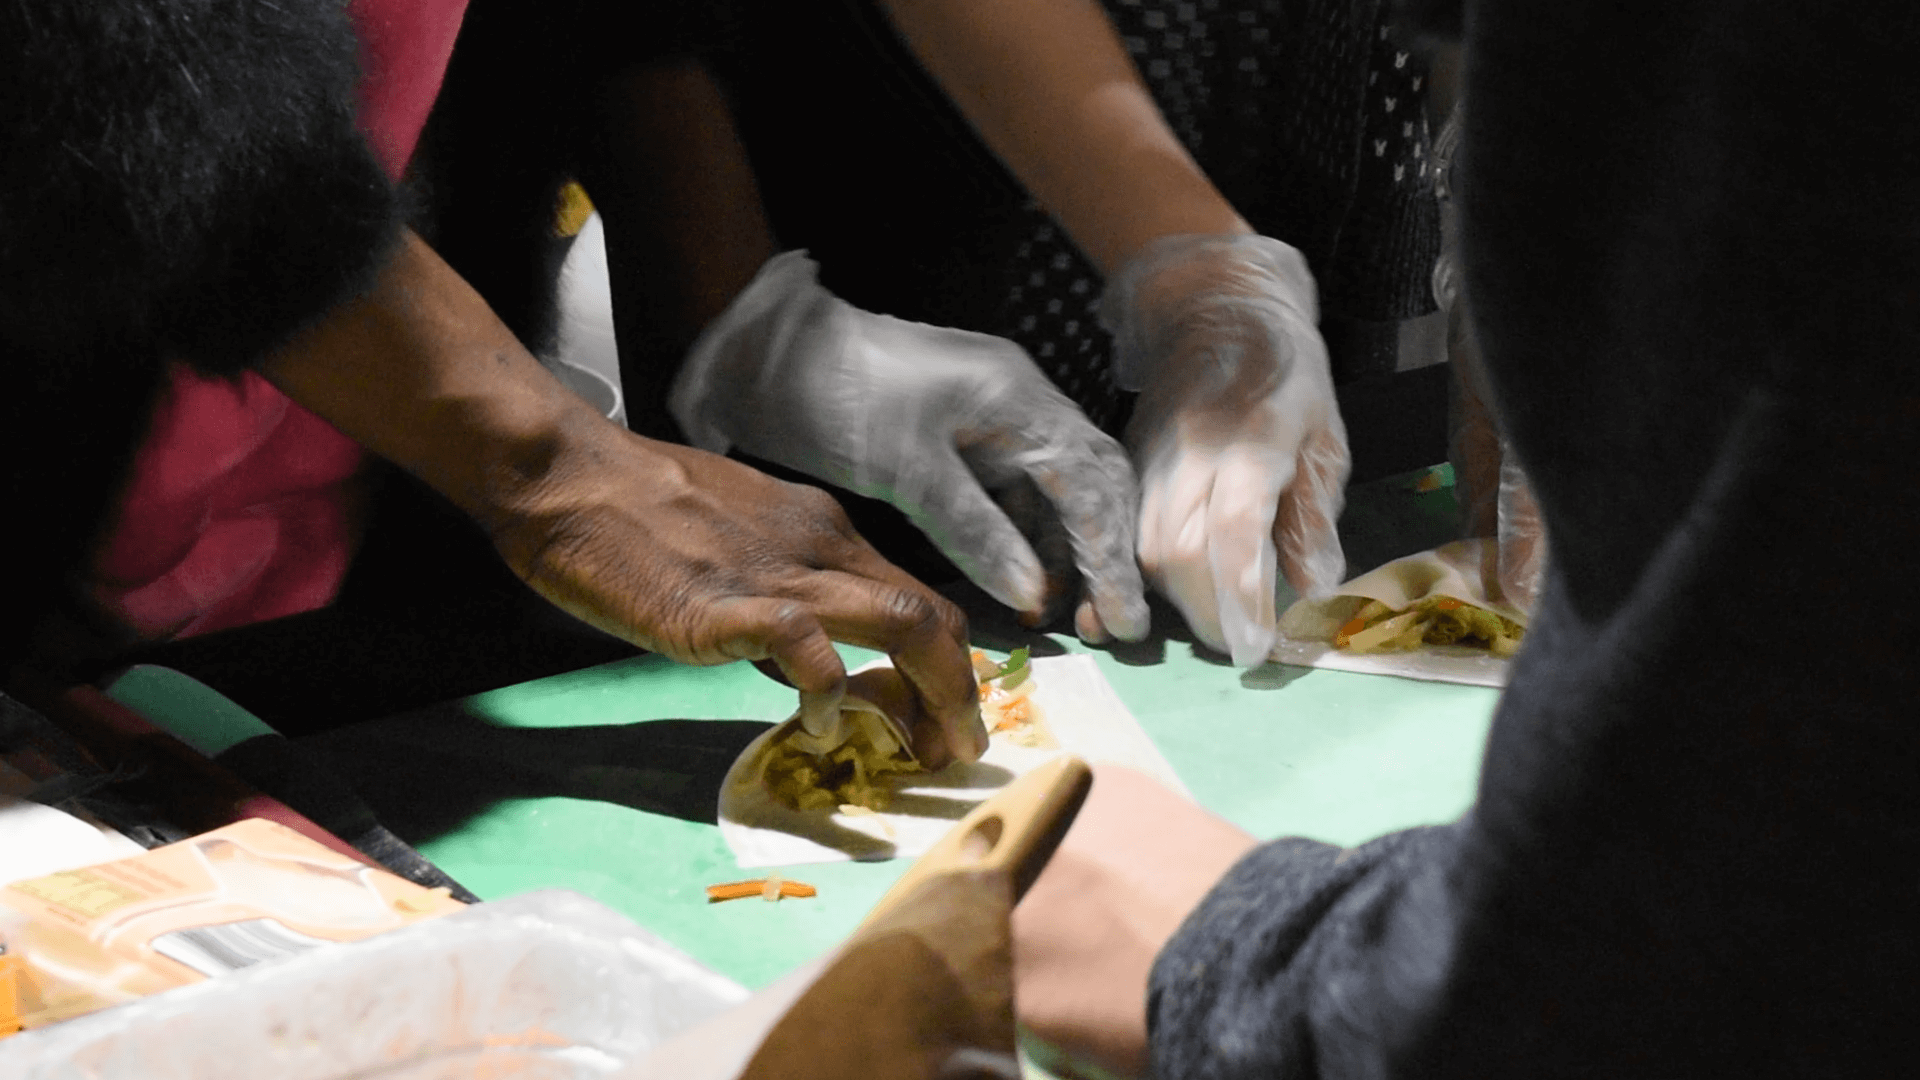 Image contains students preparing spring rolls